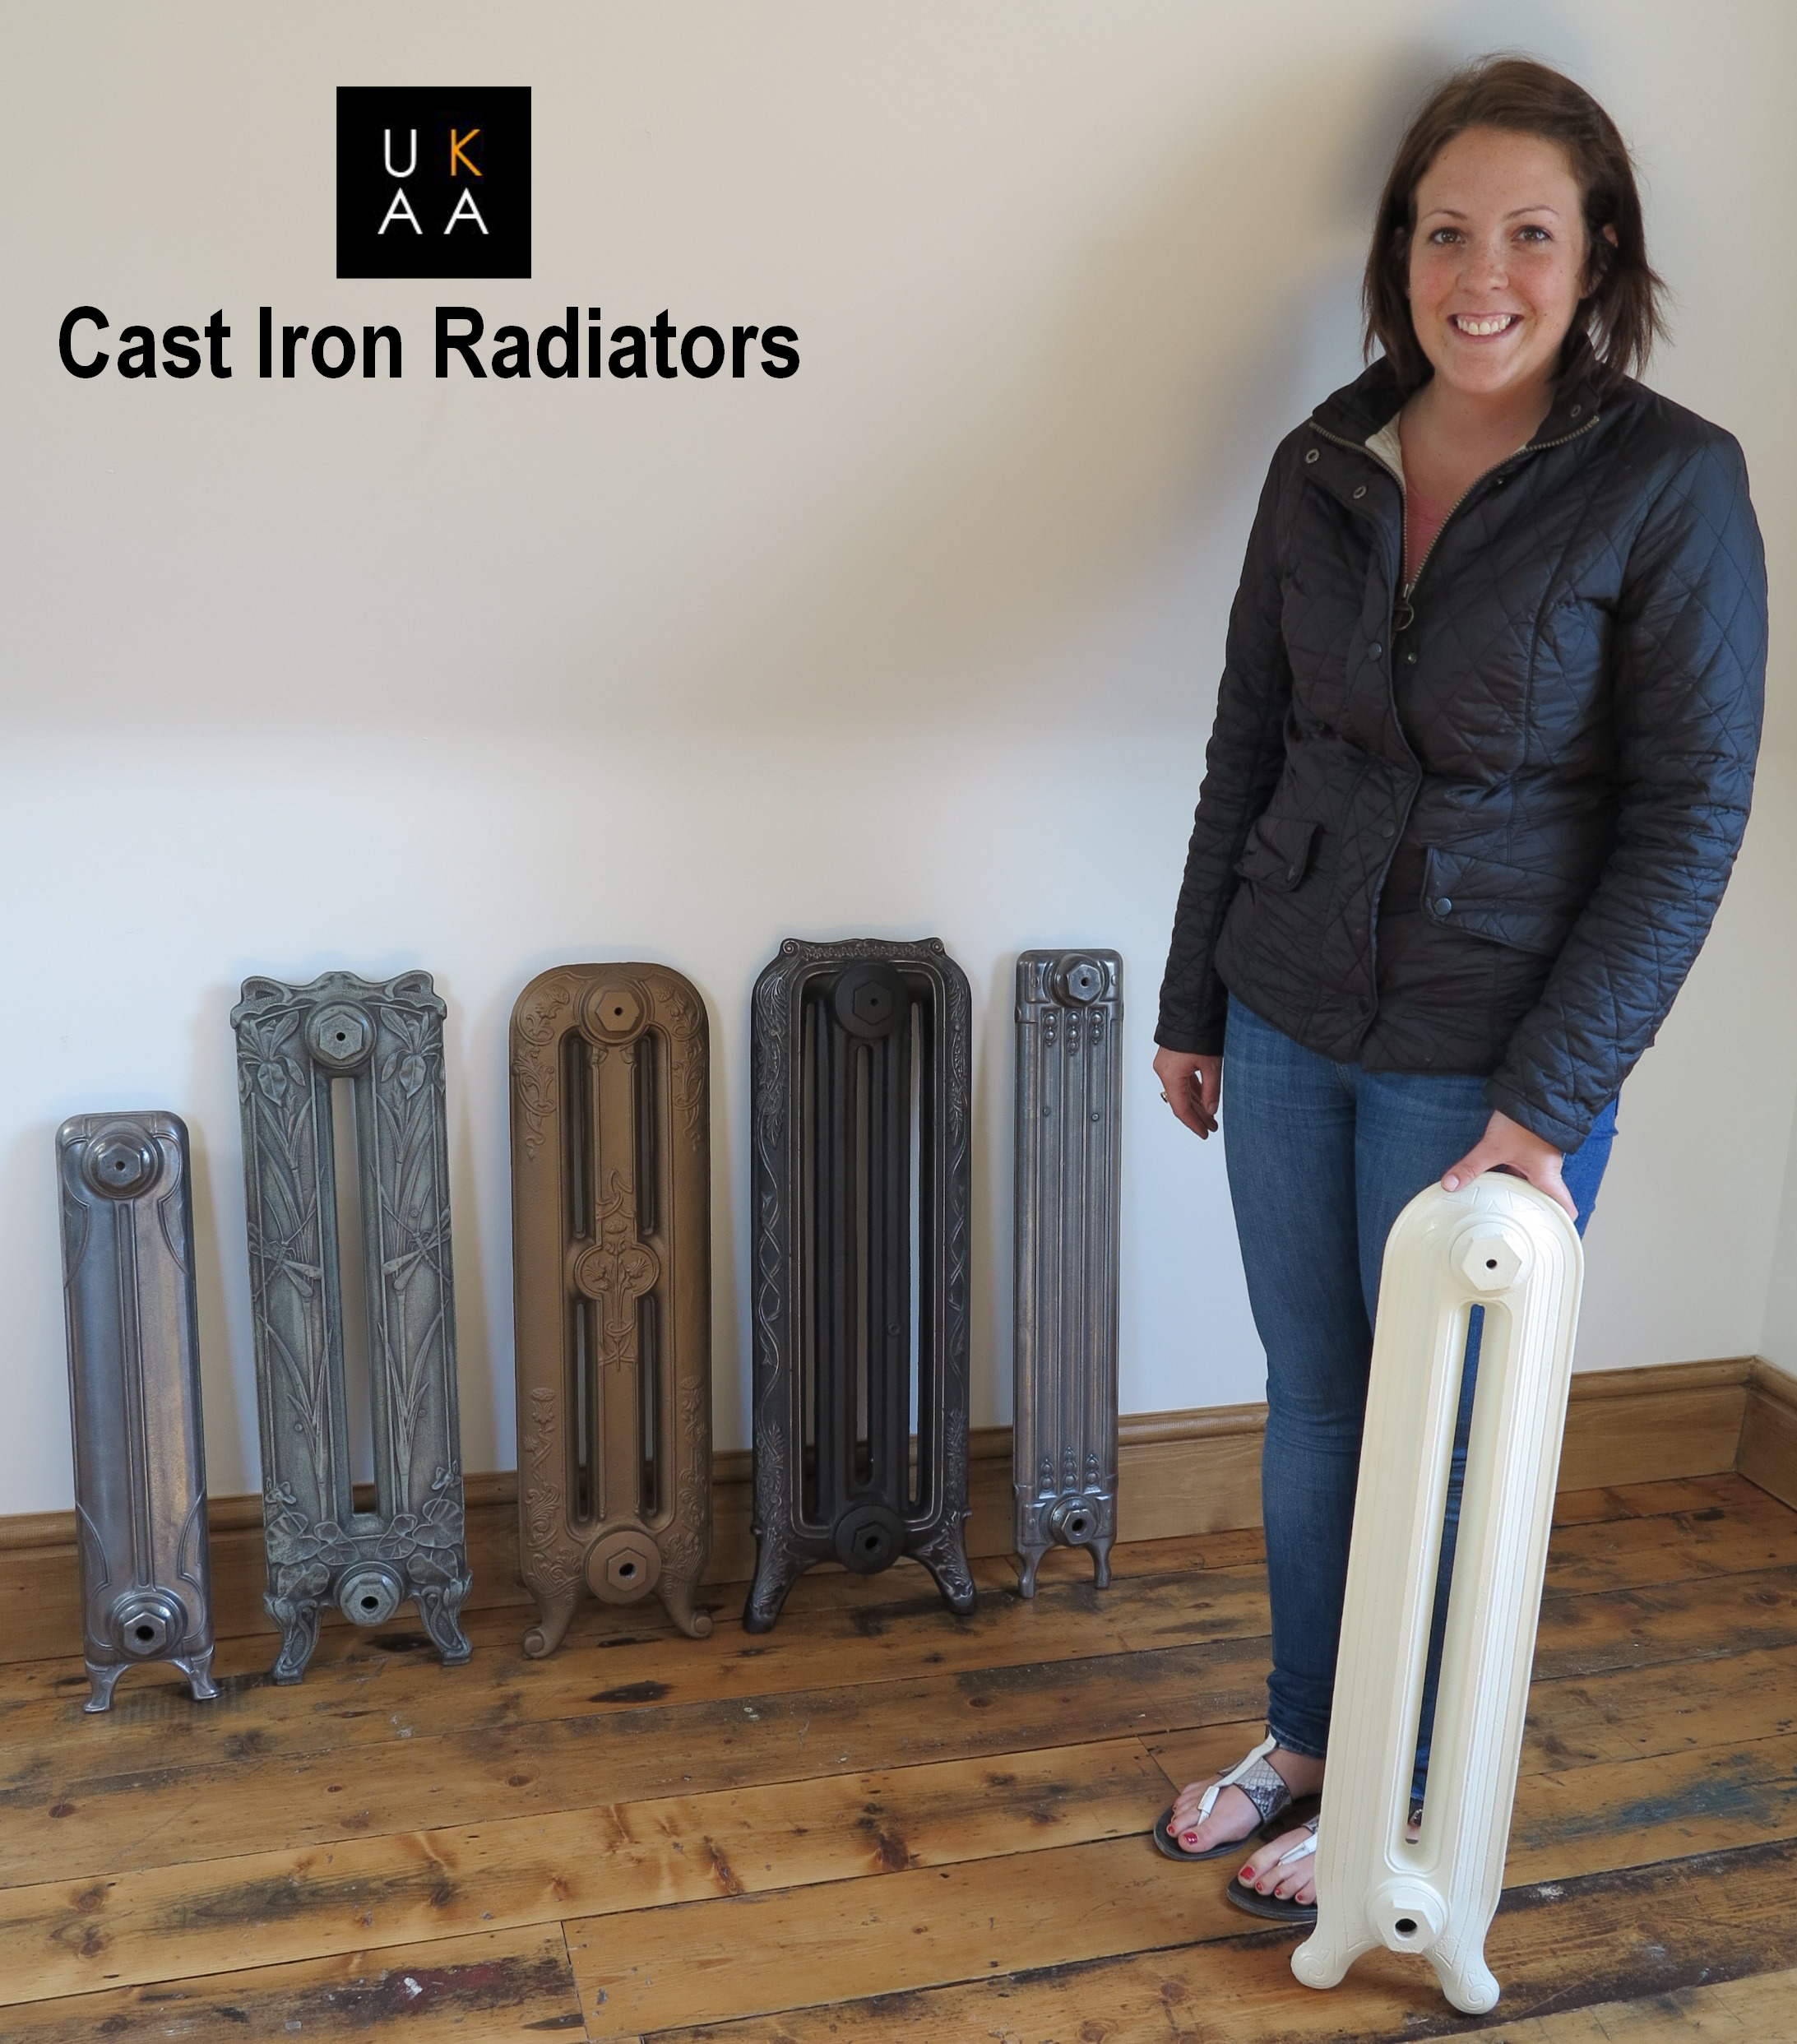 New range of cast iron radiators by Carron shown with Danielle at UKAA